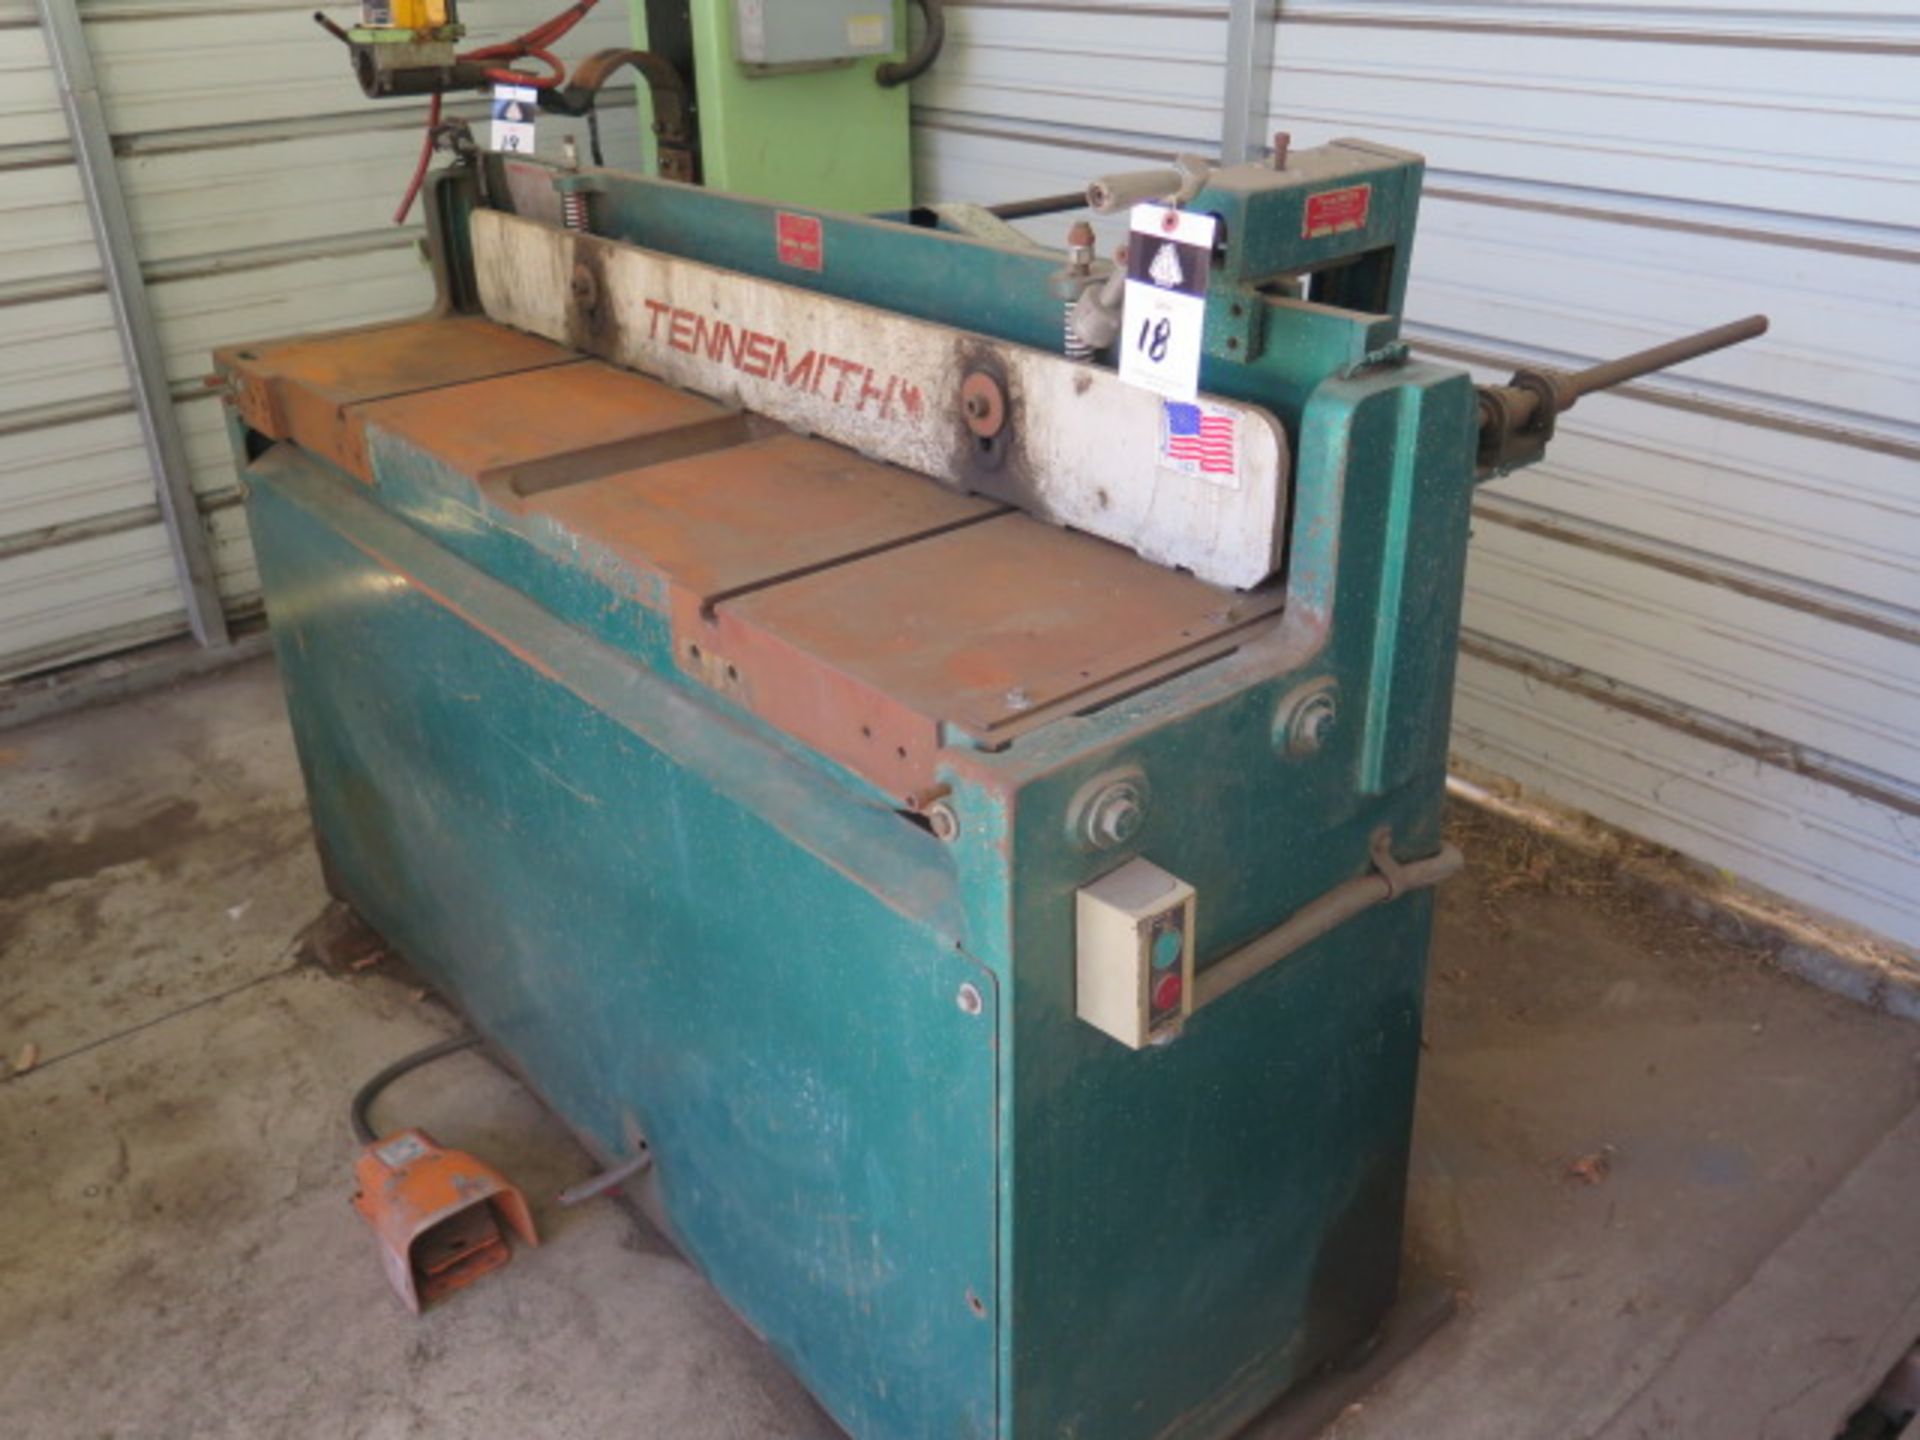 Tennsmith H52 52” Power Shear s/n 13948 w/ Dial Back Gauge (SOLD AS-IS - NO WARRANTY) - Image 2 of 9